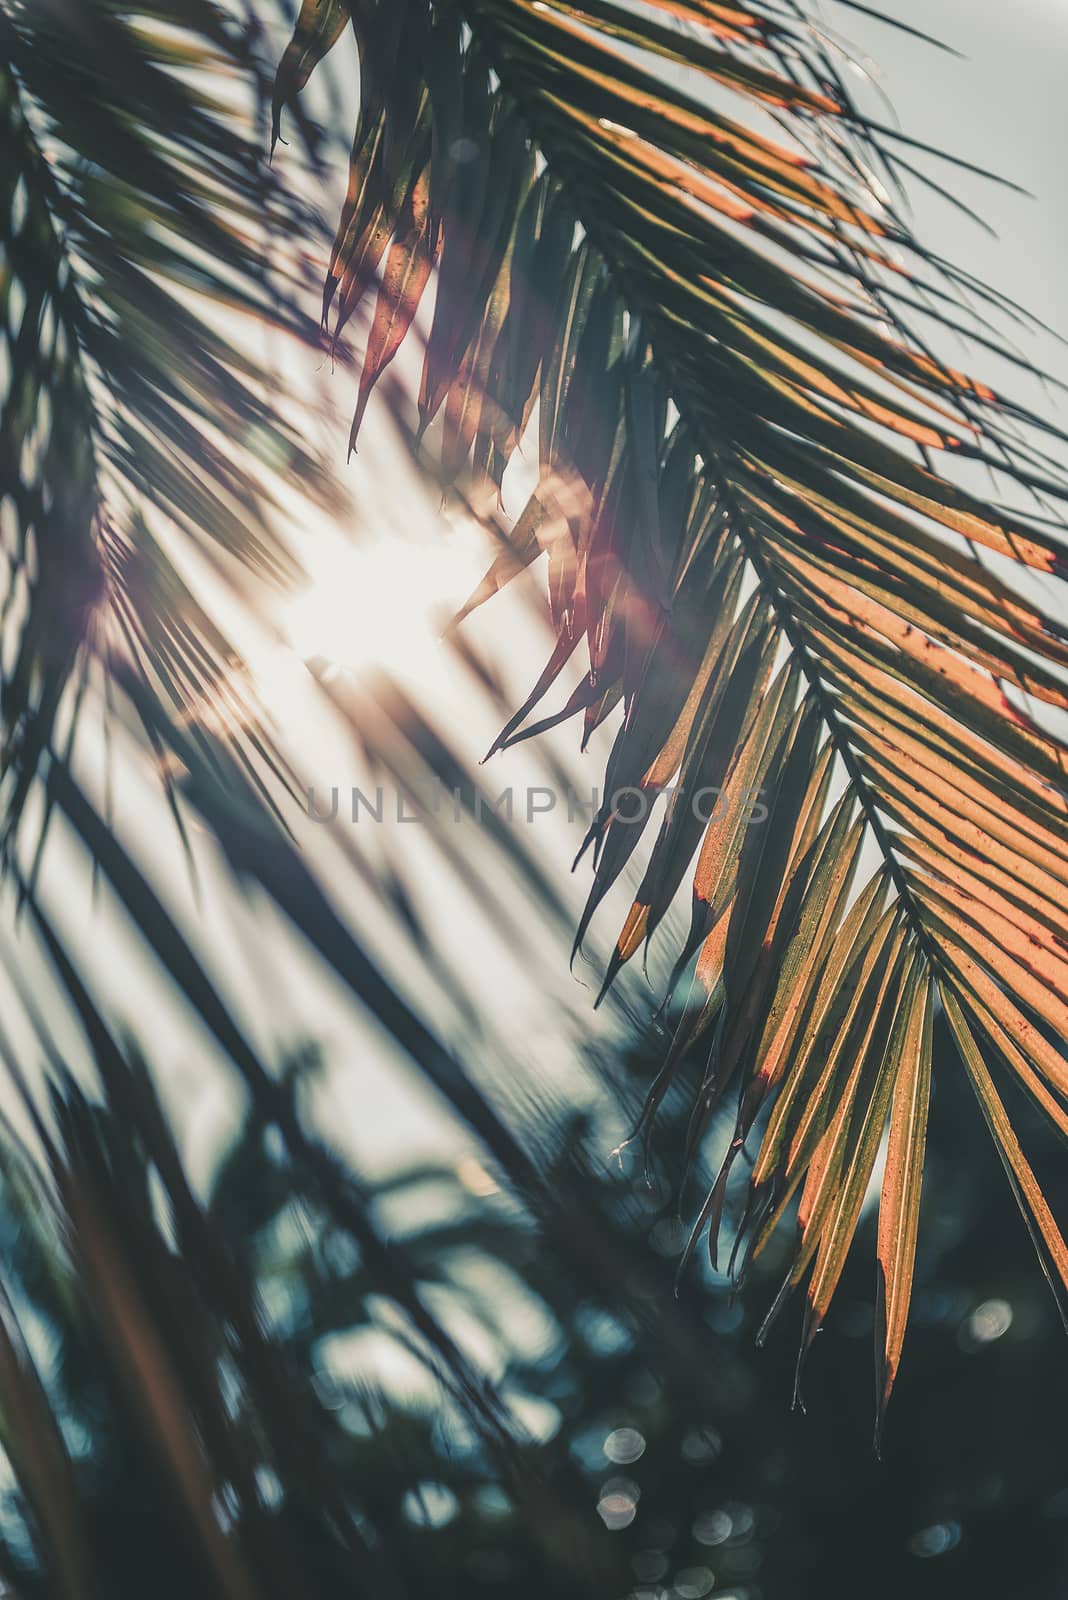 vertical photo of a dry palm leaf covering the sunlight at sunset, in the background you can see other palm trees out of focus